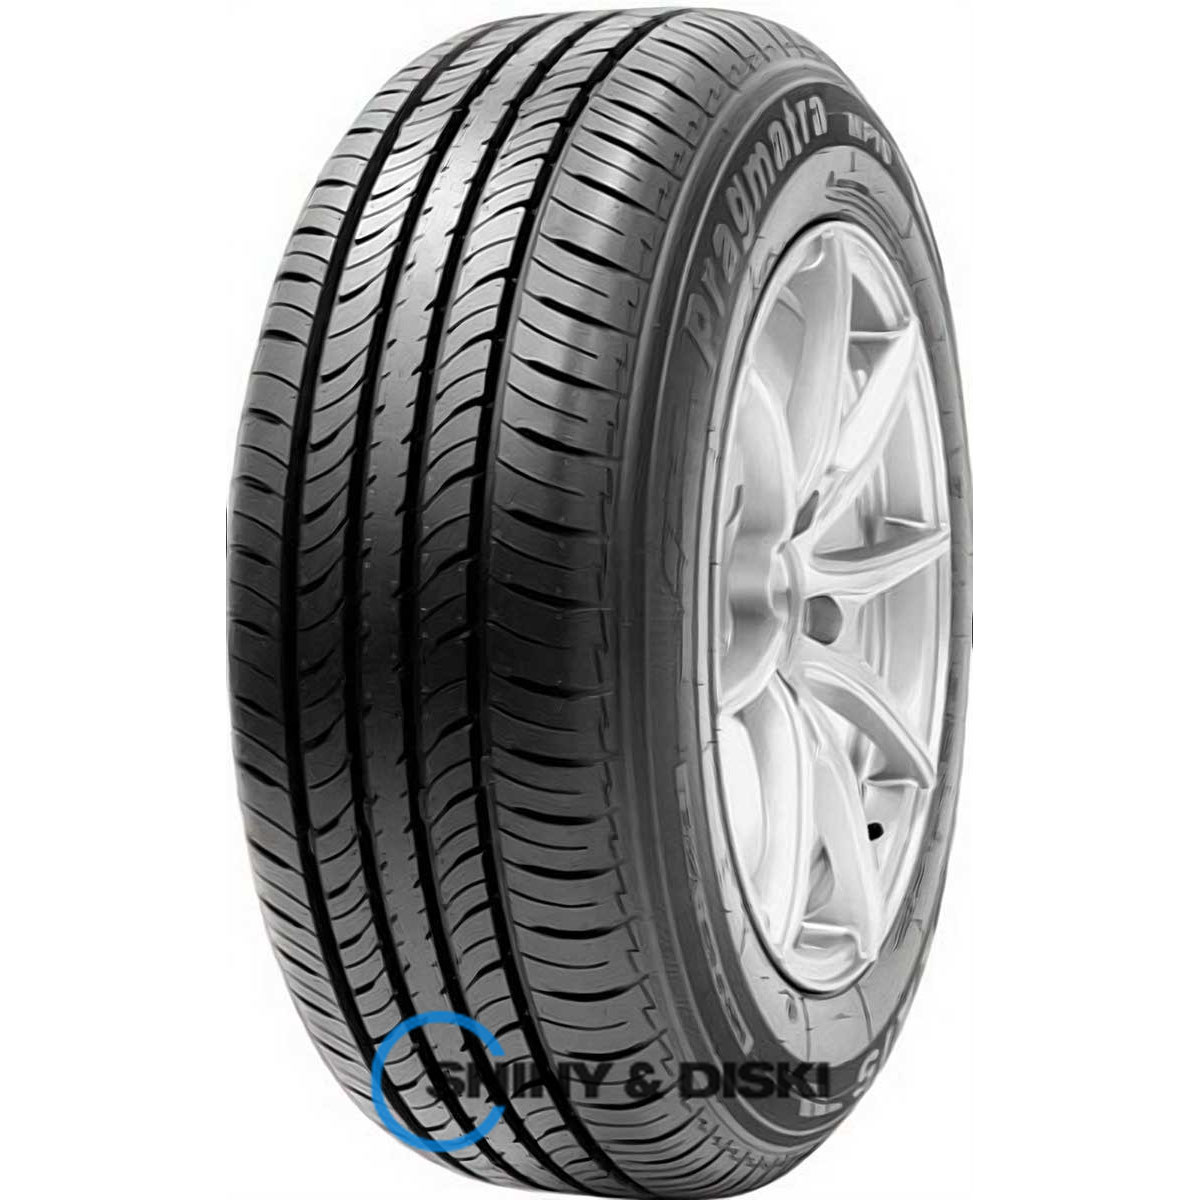 maxxis mp10 mecotra 185/65 r14 86h